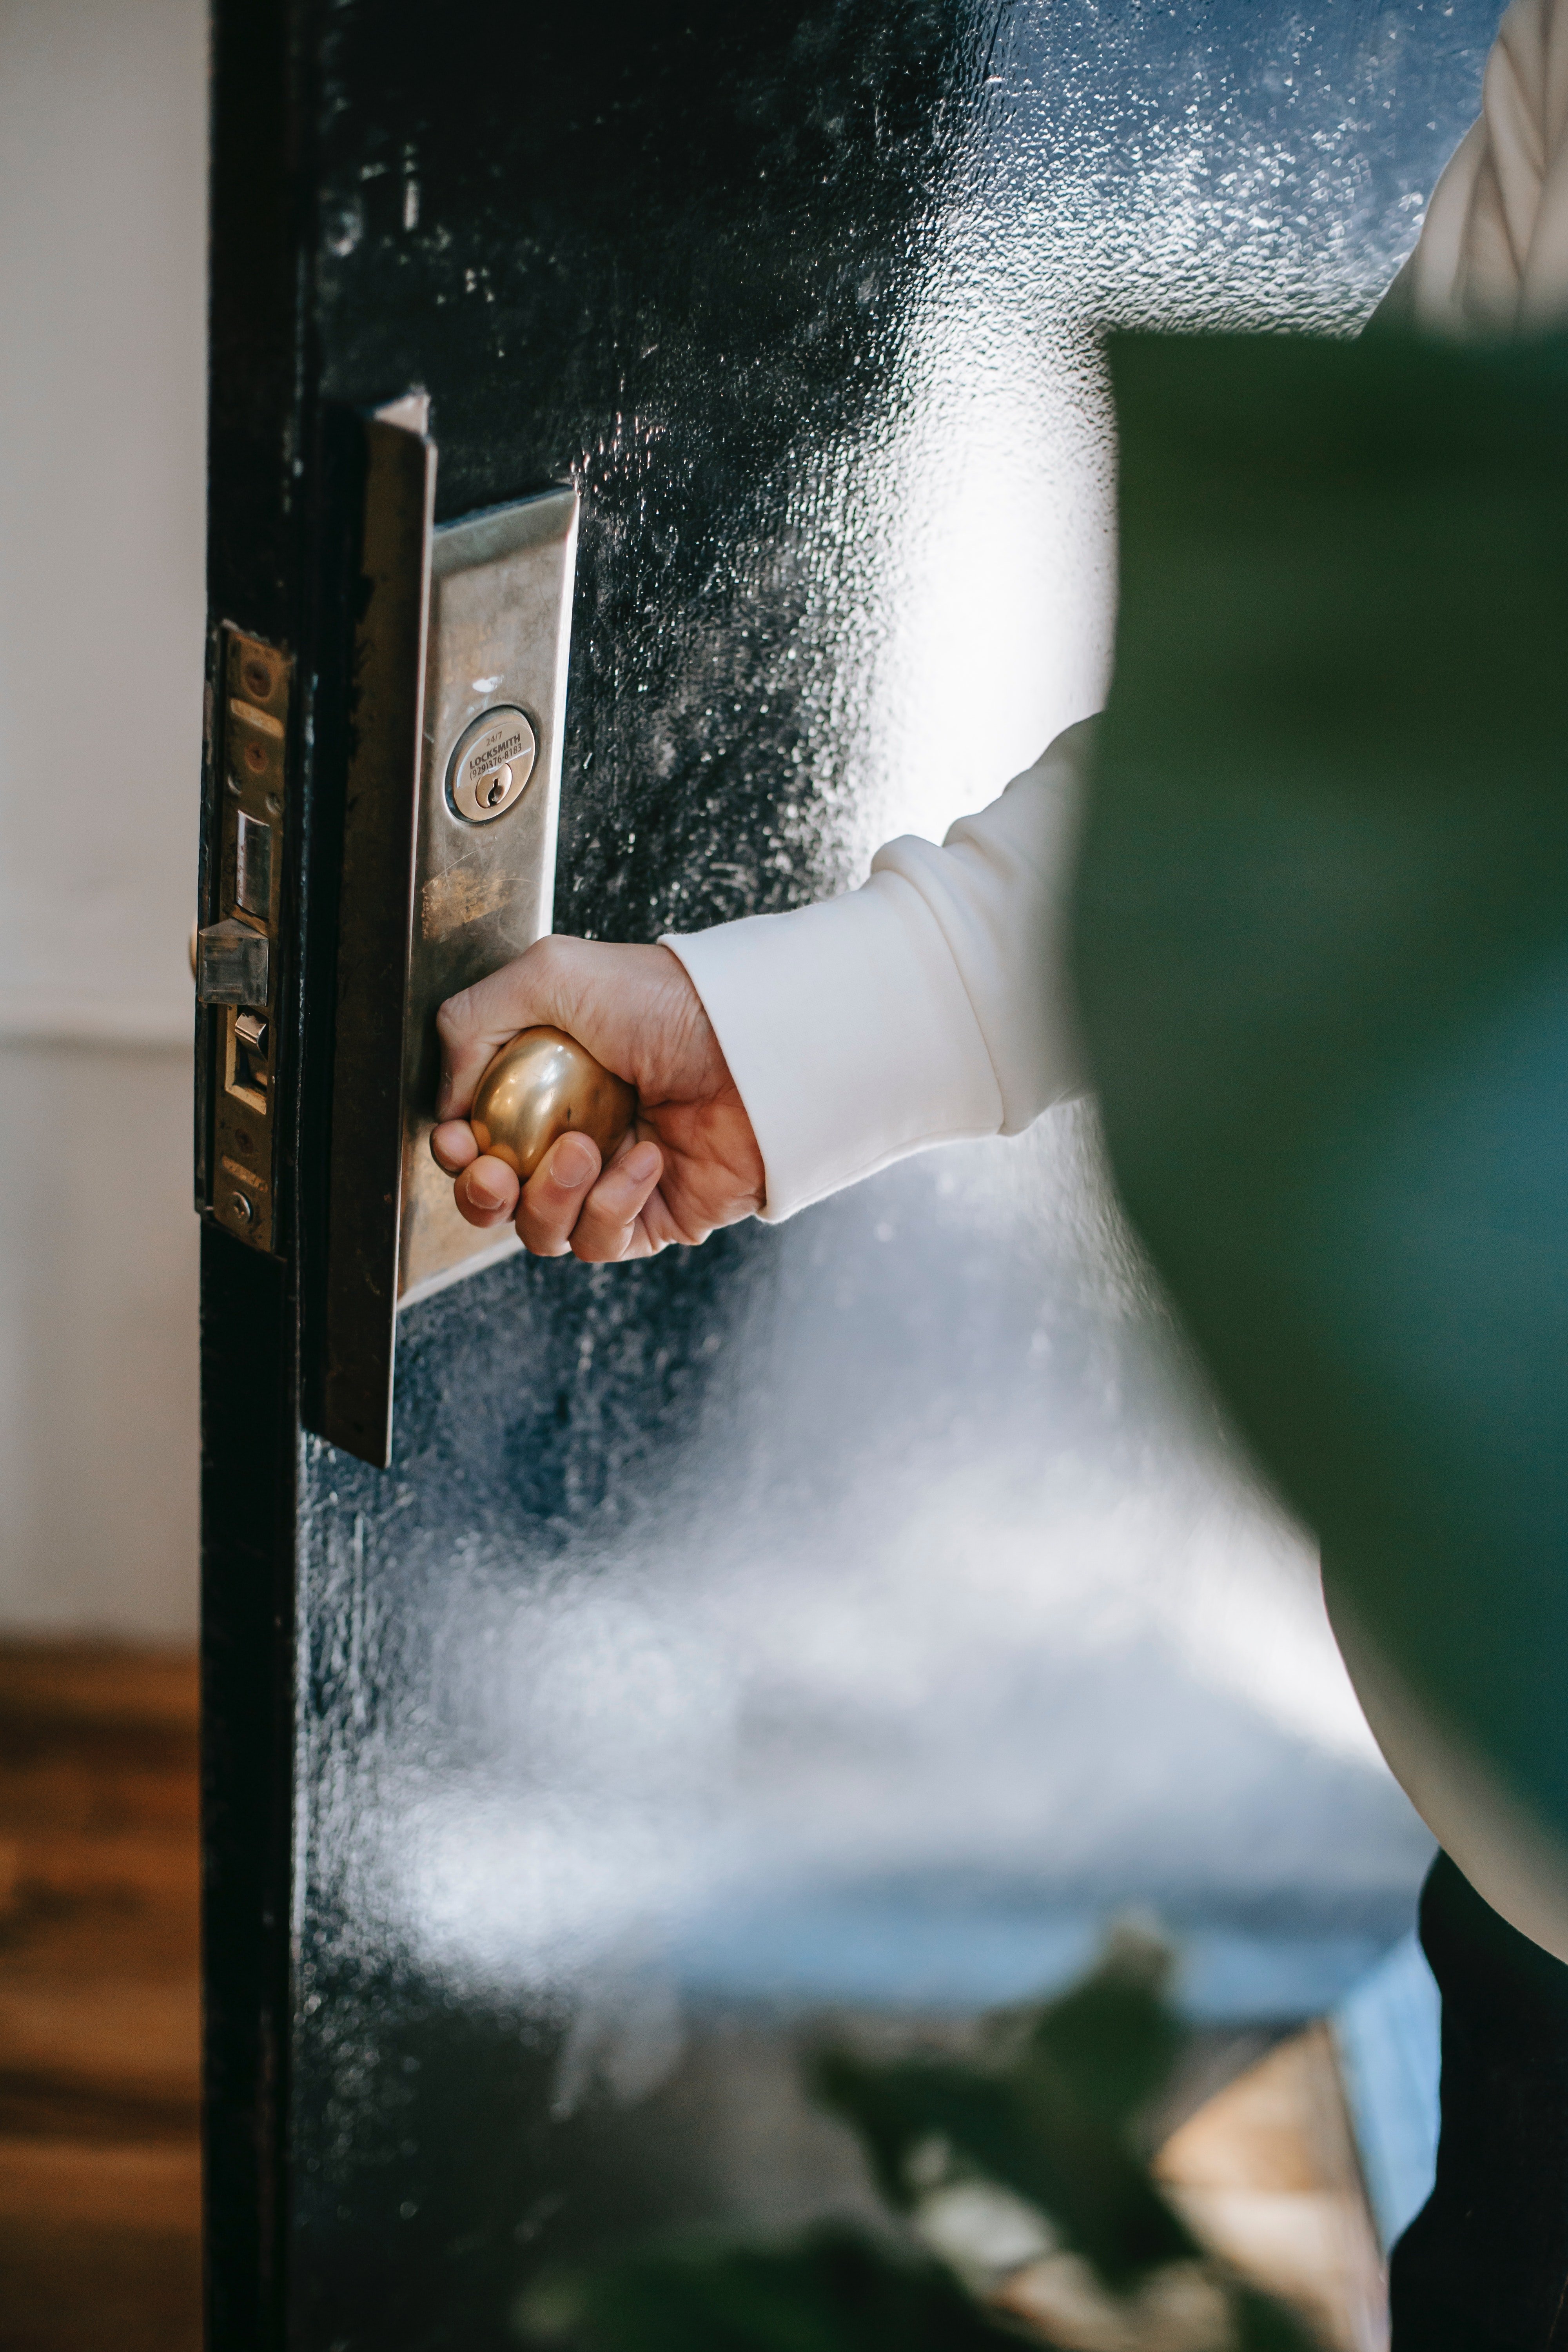 Judy quickly shut the door as she hurried the man into the building. | Photo: Pexels